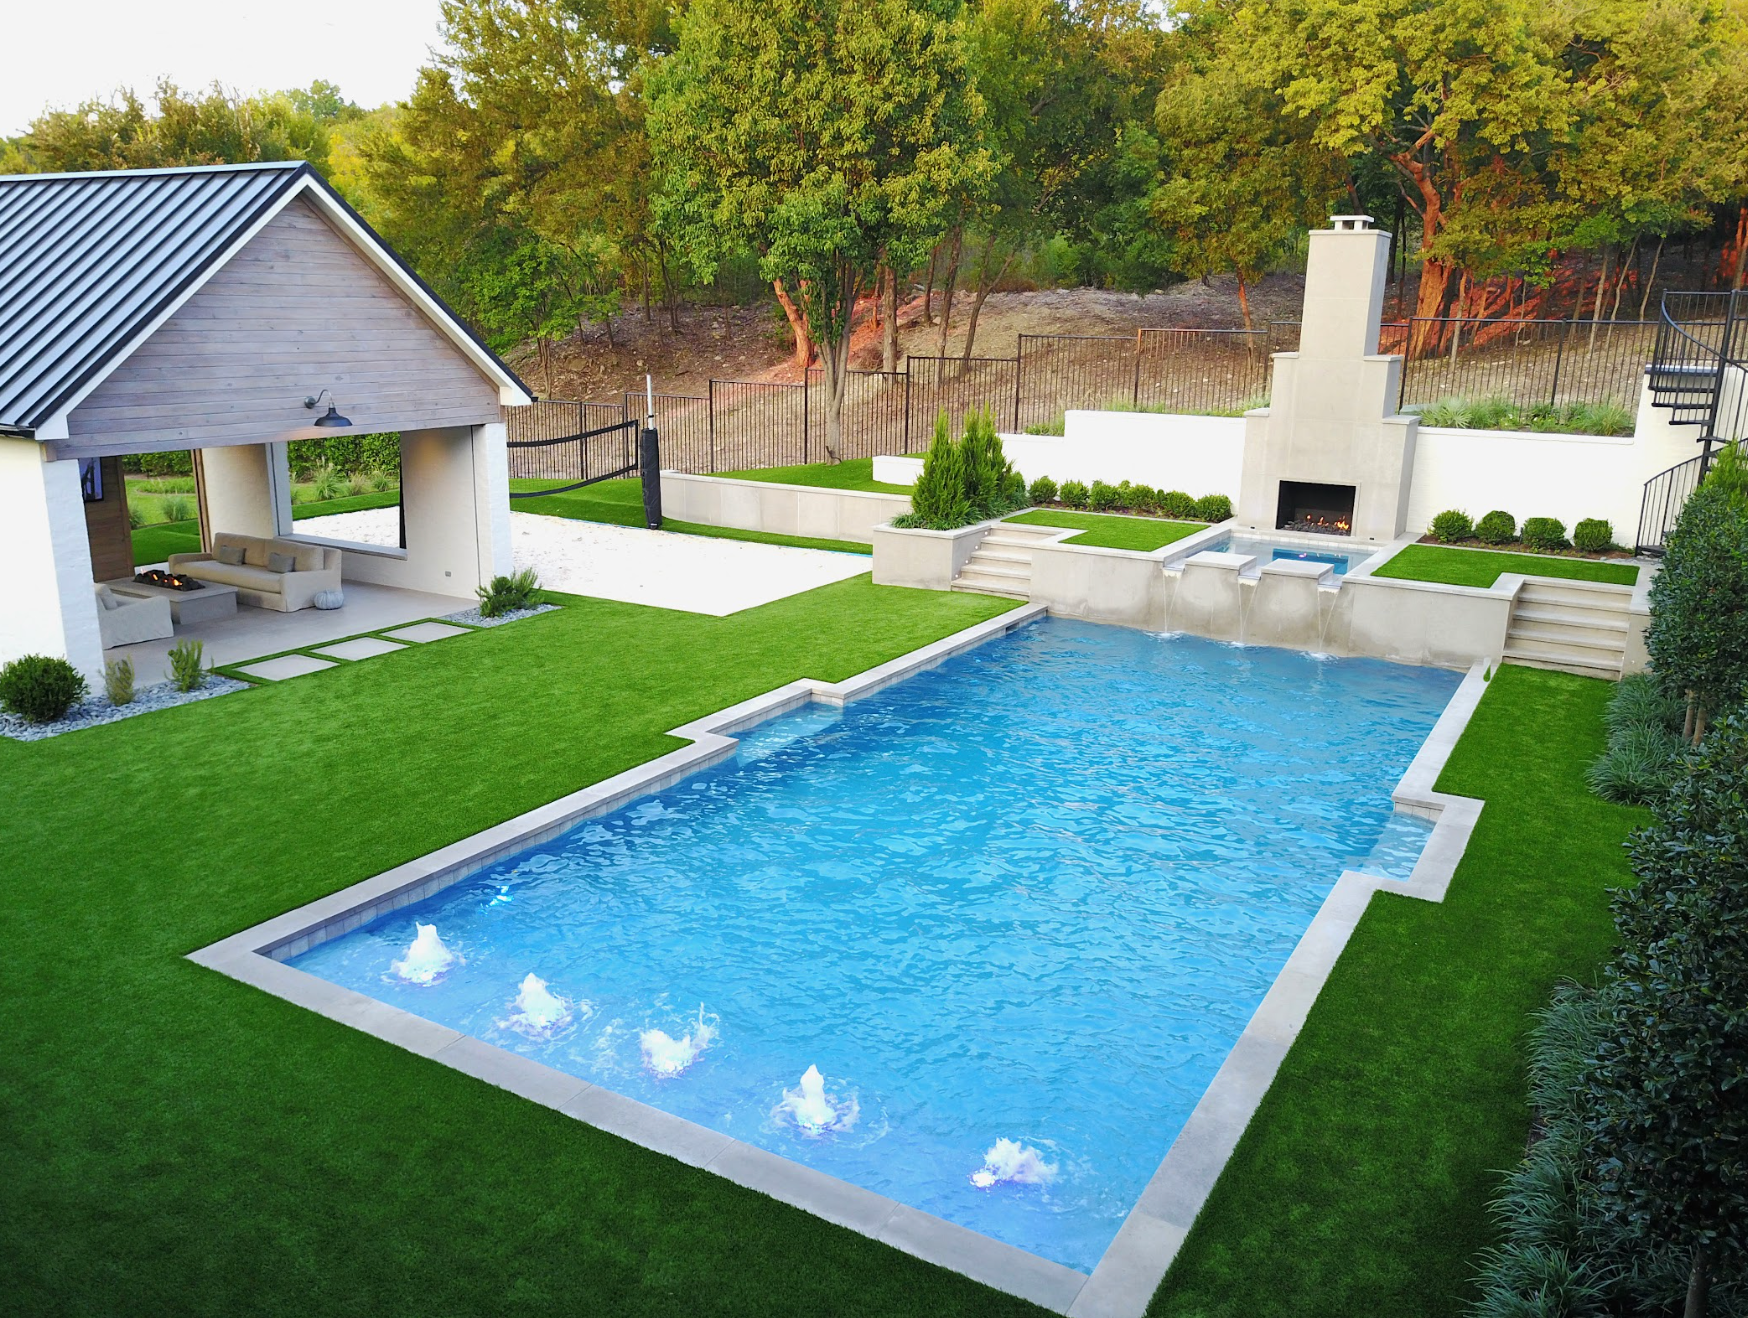 Square outdoor residential swimming pool - Miller Pools